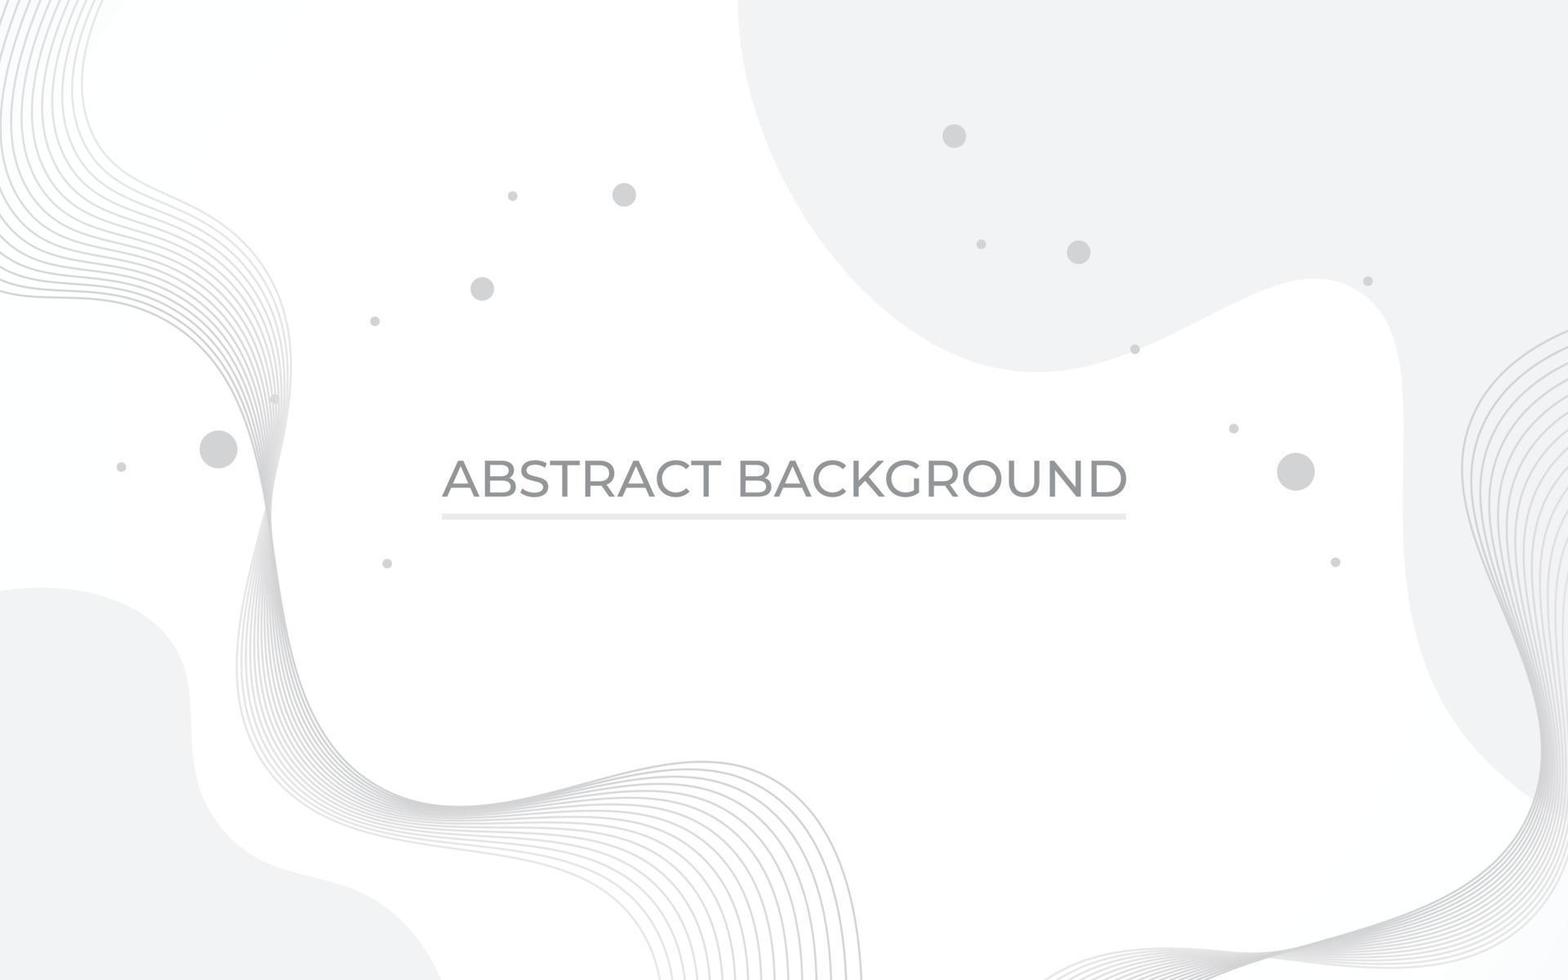 Minimalist white abstract background EPS 10 vector